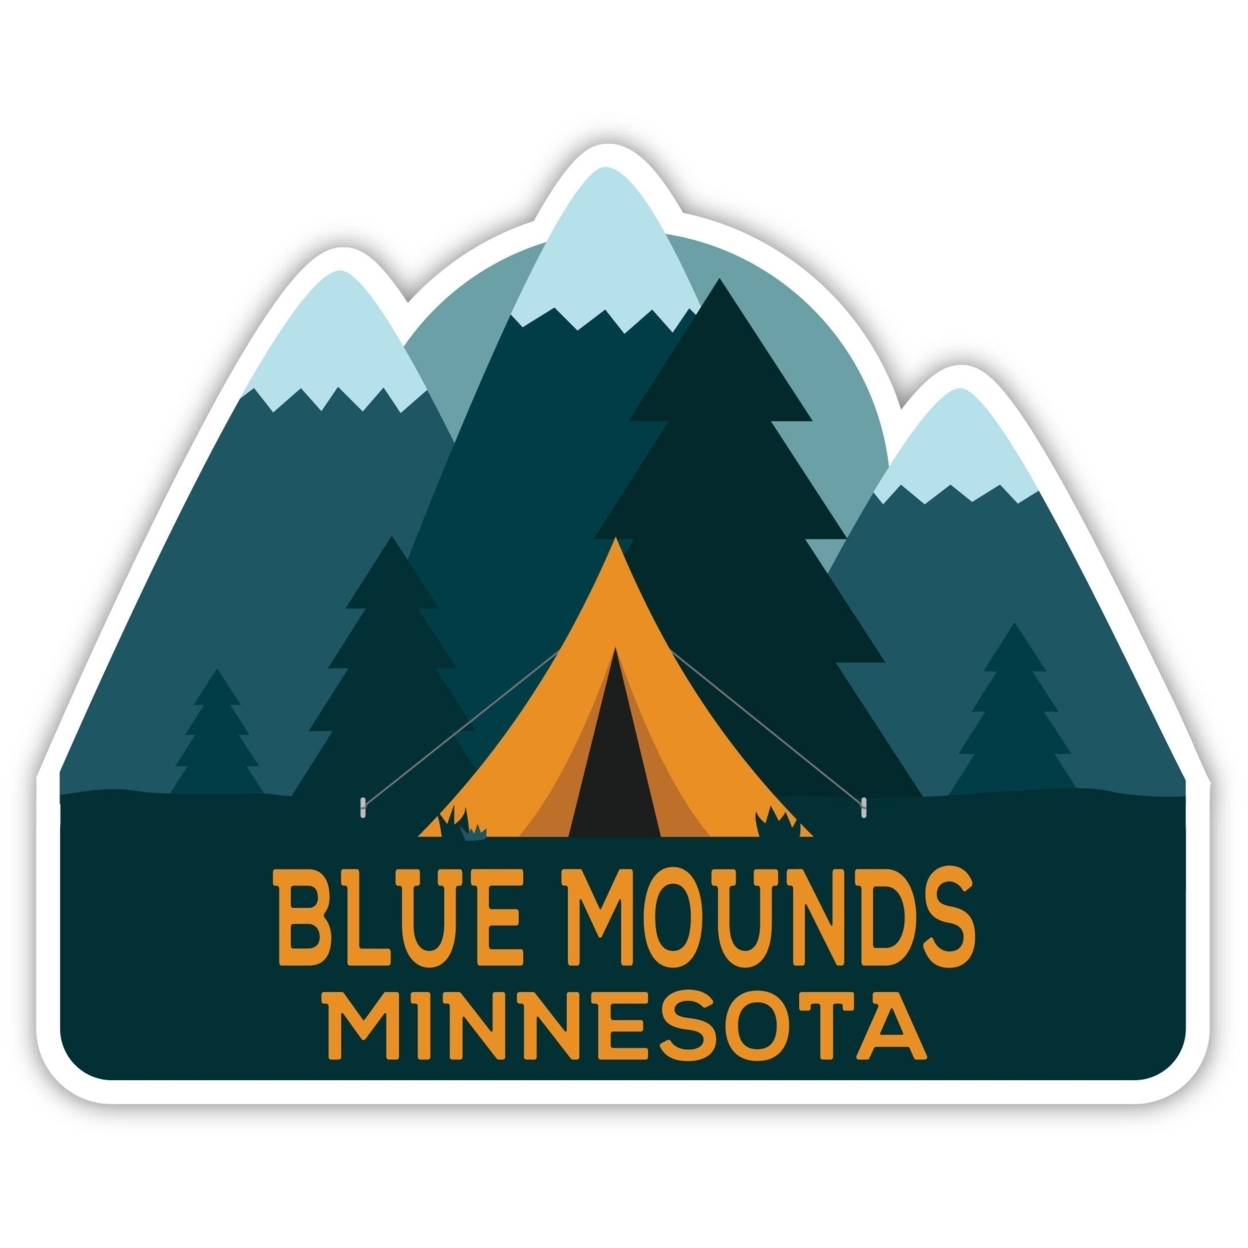 Blue Mounds Minnesota Souvenir Decorative Stickers (Choose Theme And Size) - 4-Pack, 2-Inch, Tent